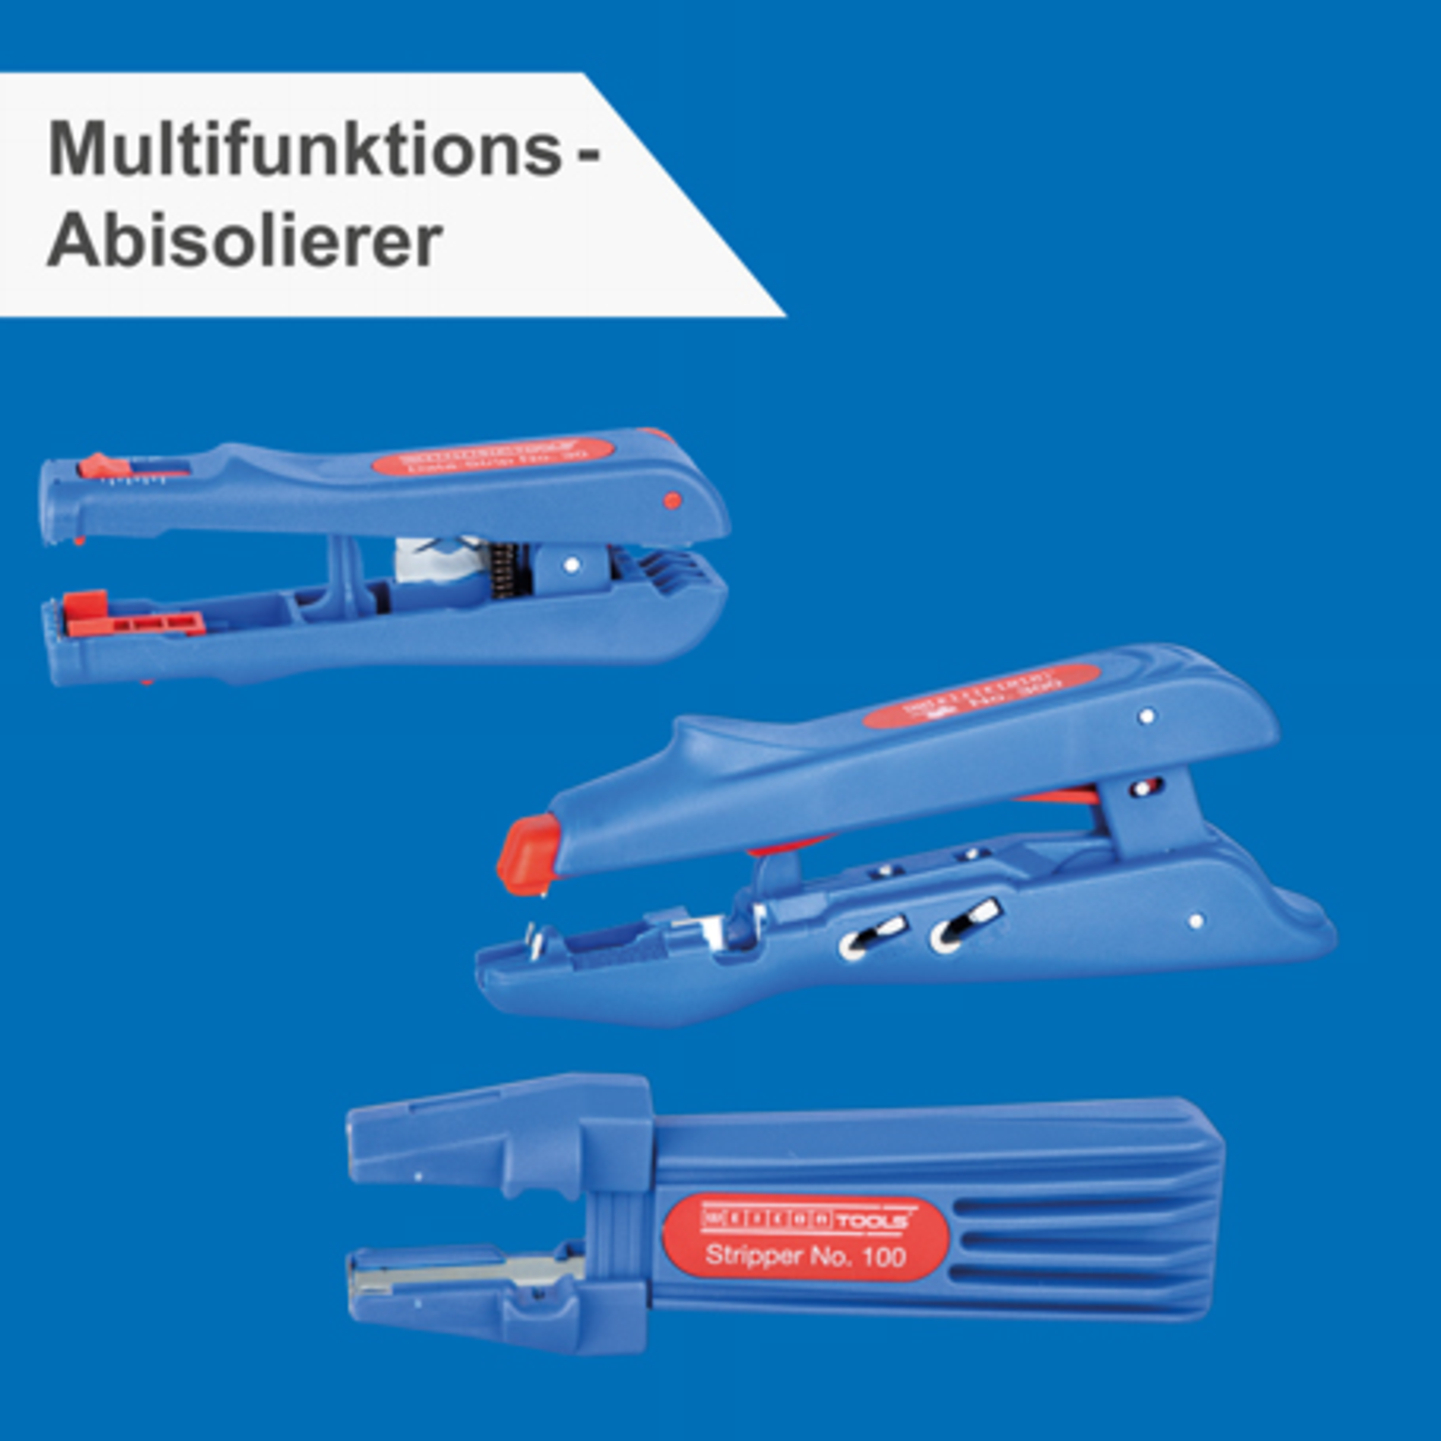 Multifunktions-Abisolierer